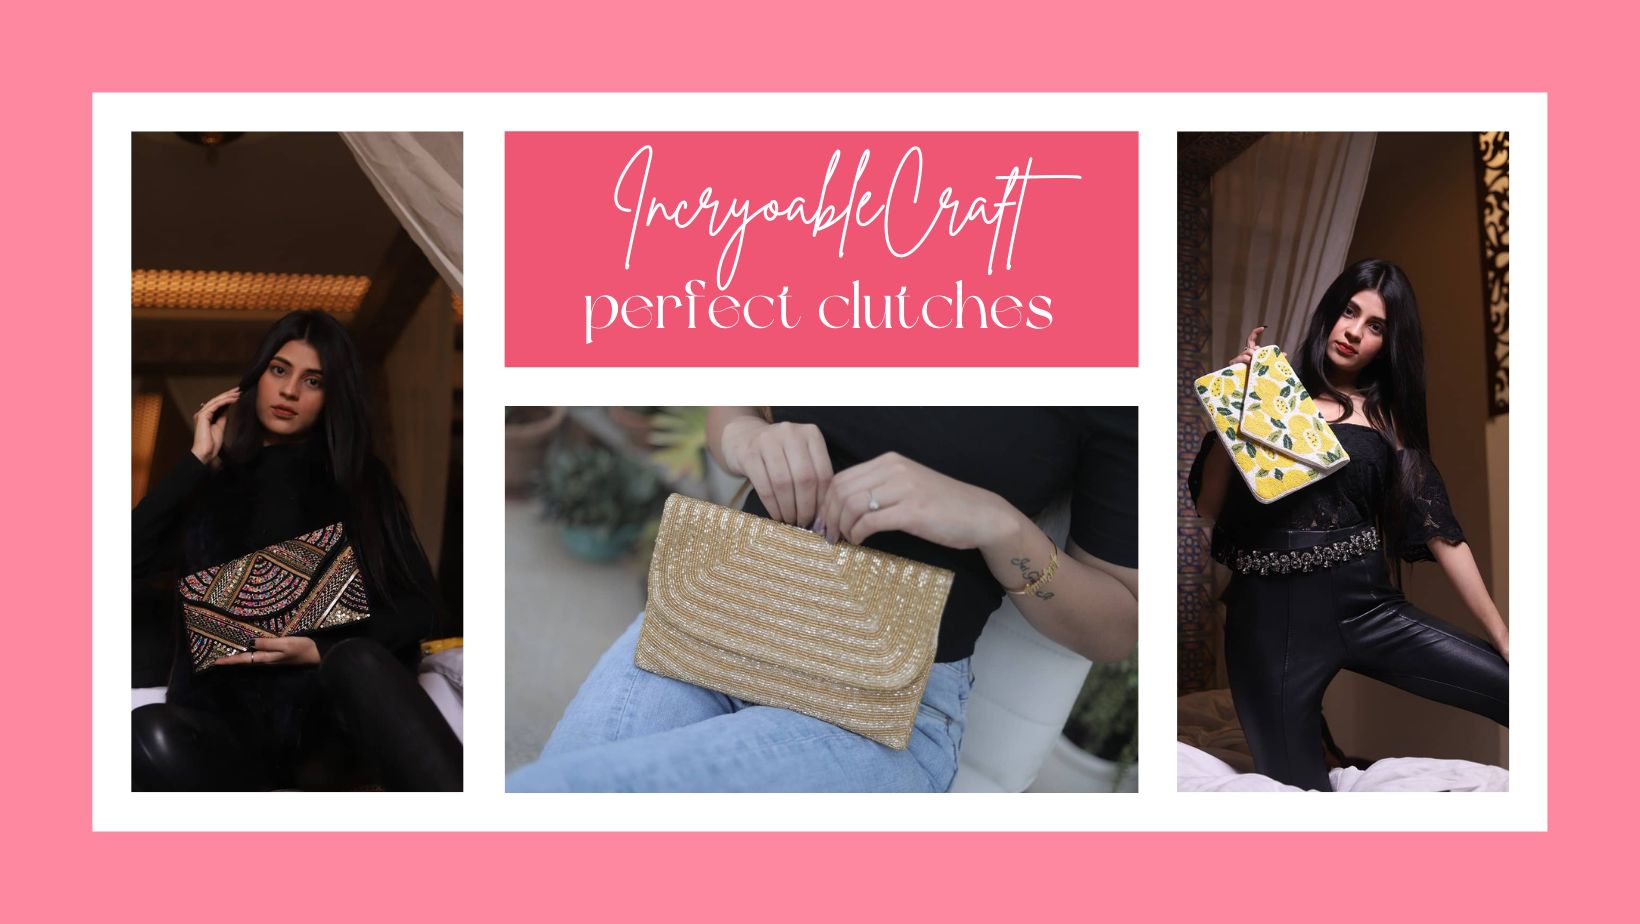 Find the perfect clutch for your personality at ‘Incroyable craft’